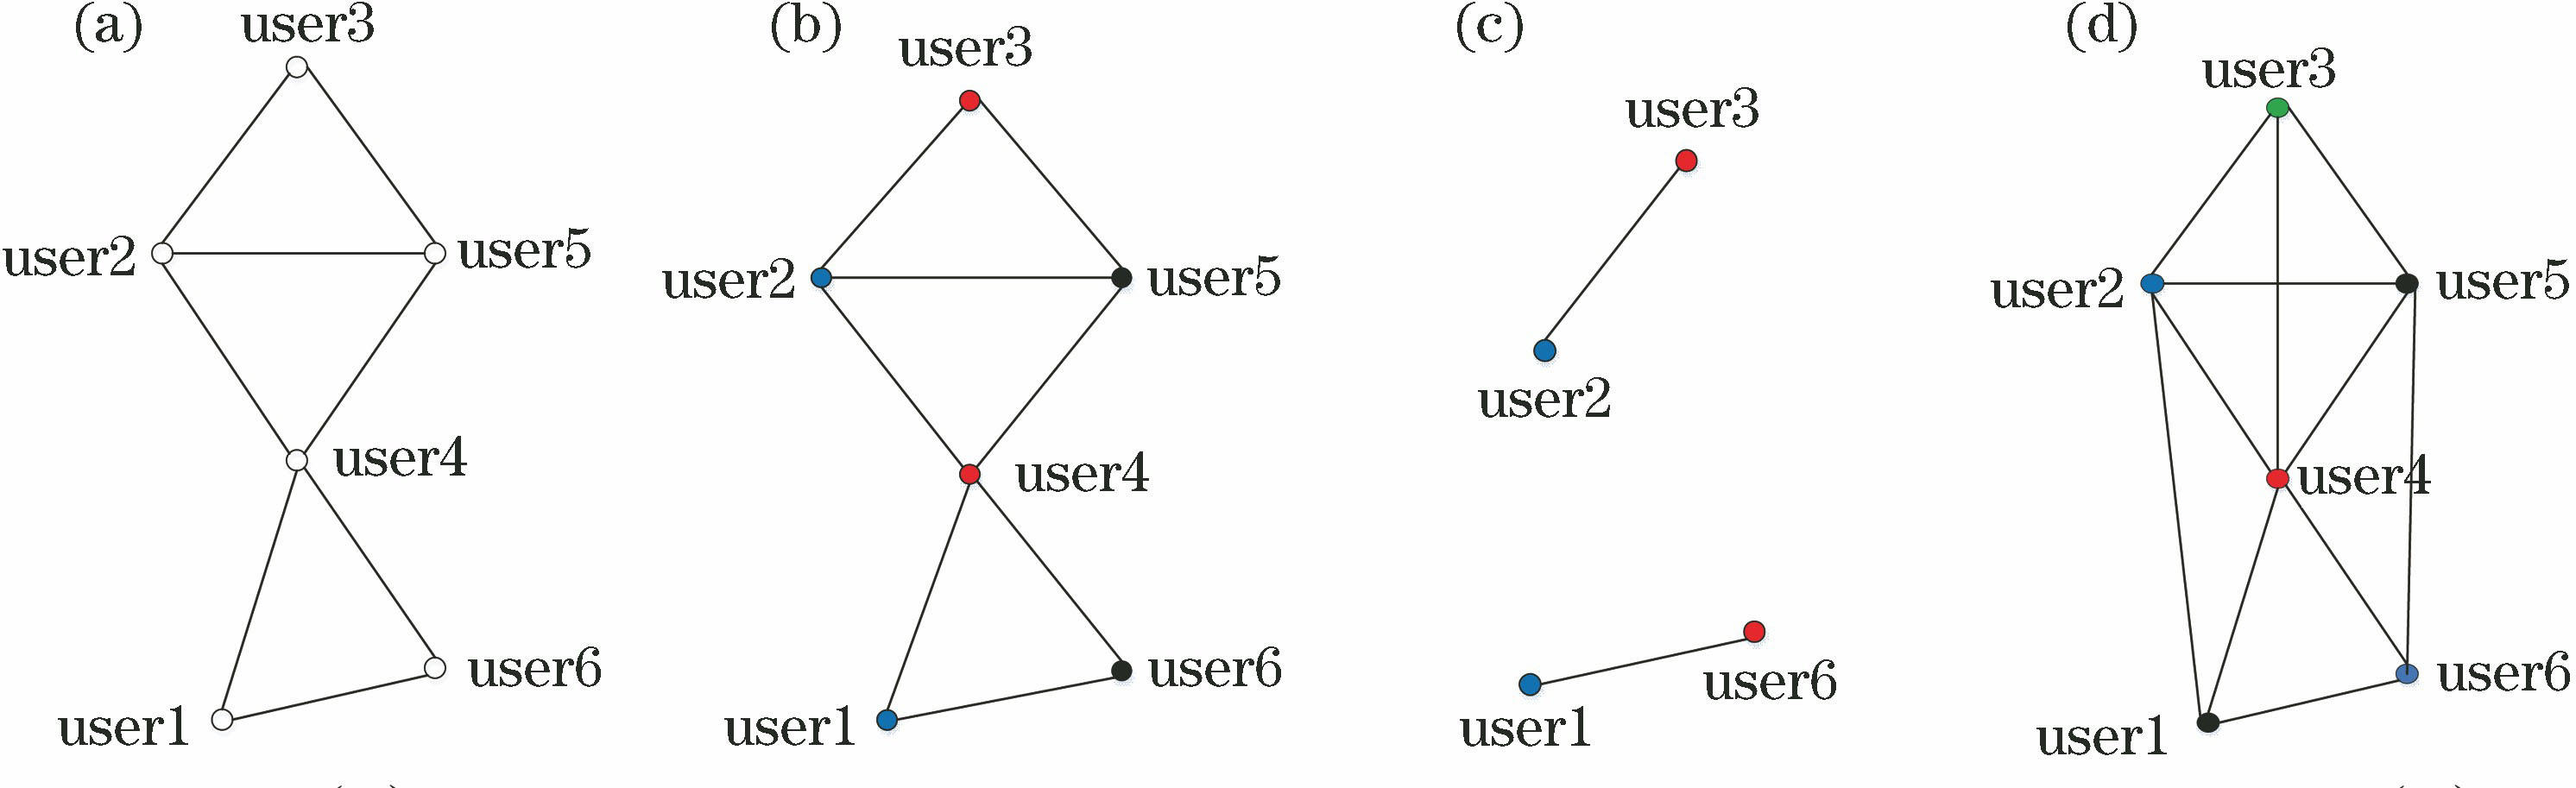 Undirected graphs in different situations correspond to network in Fig. 1. (a) Undirected graph of network shown in Fig. 1, where the vertexes denote any two UEs share the same AP with each other; (b) colored graph after applying the Dsatur algorithm[9]; (c) reallocation result when pilots are insufficient; (d) reallocation result when pilots are sufficient